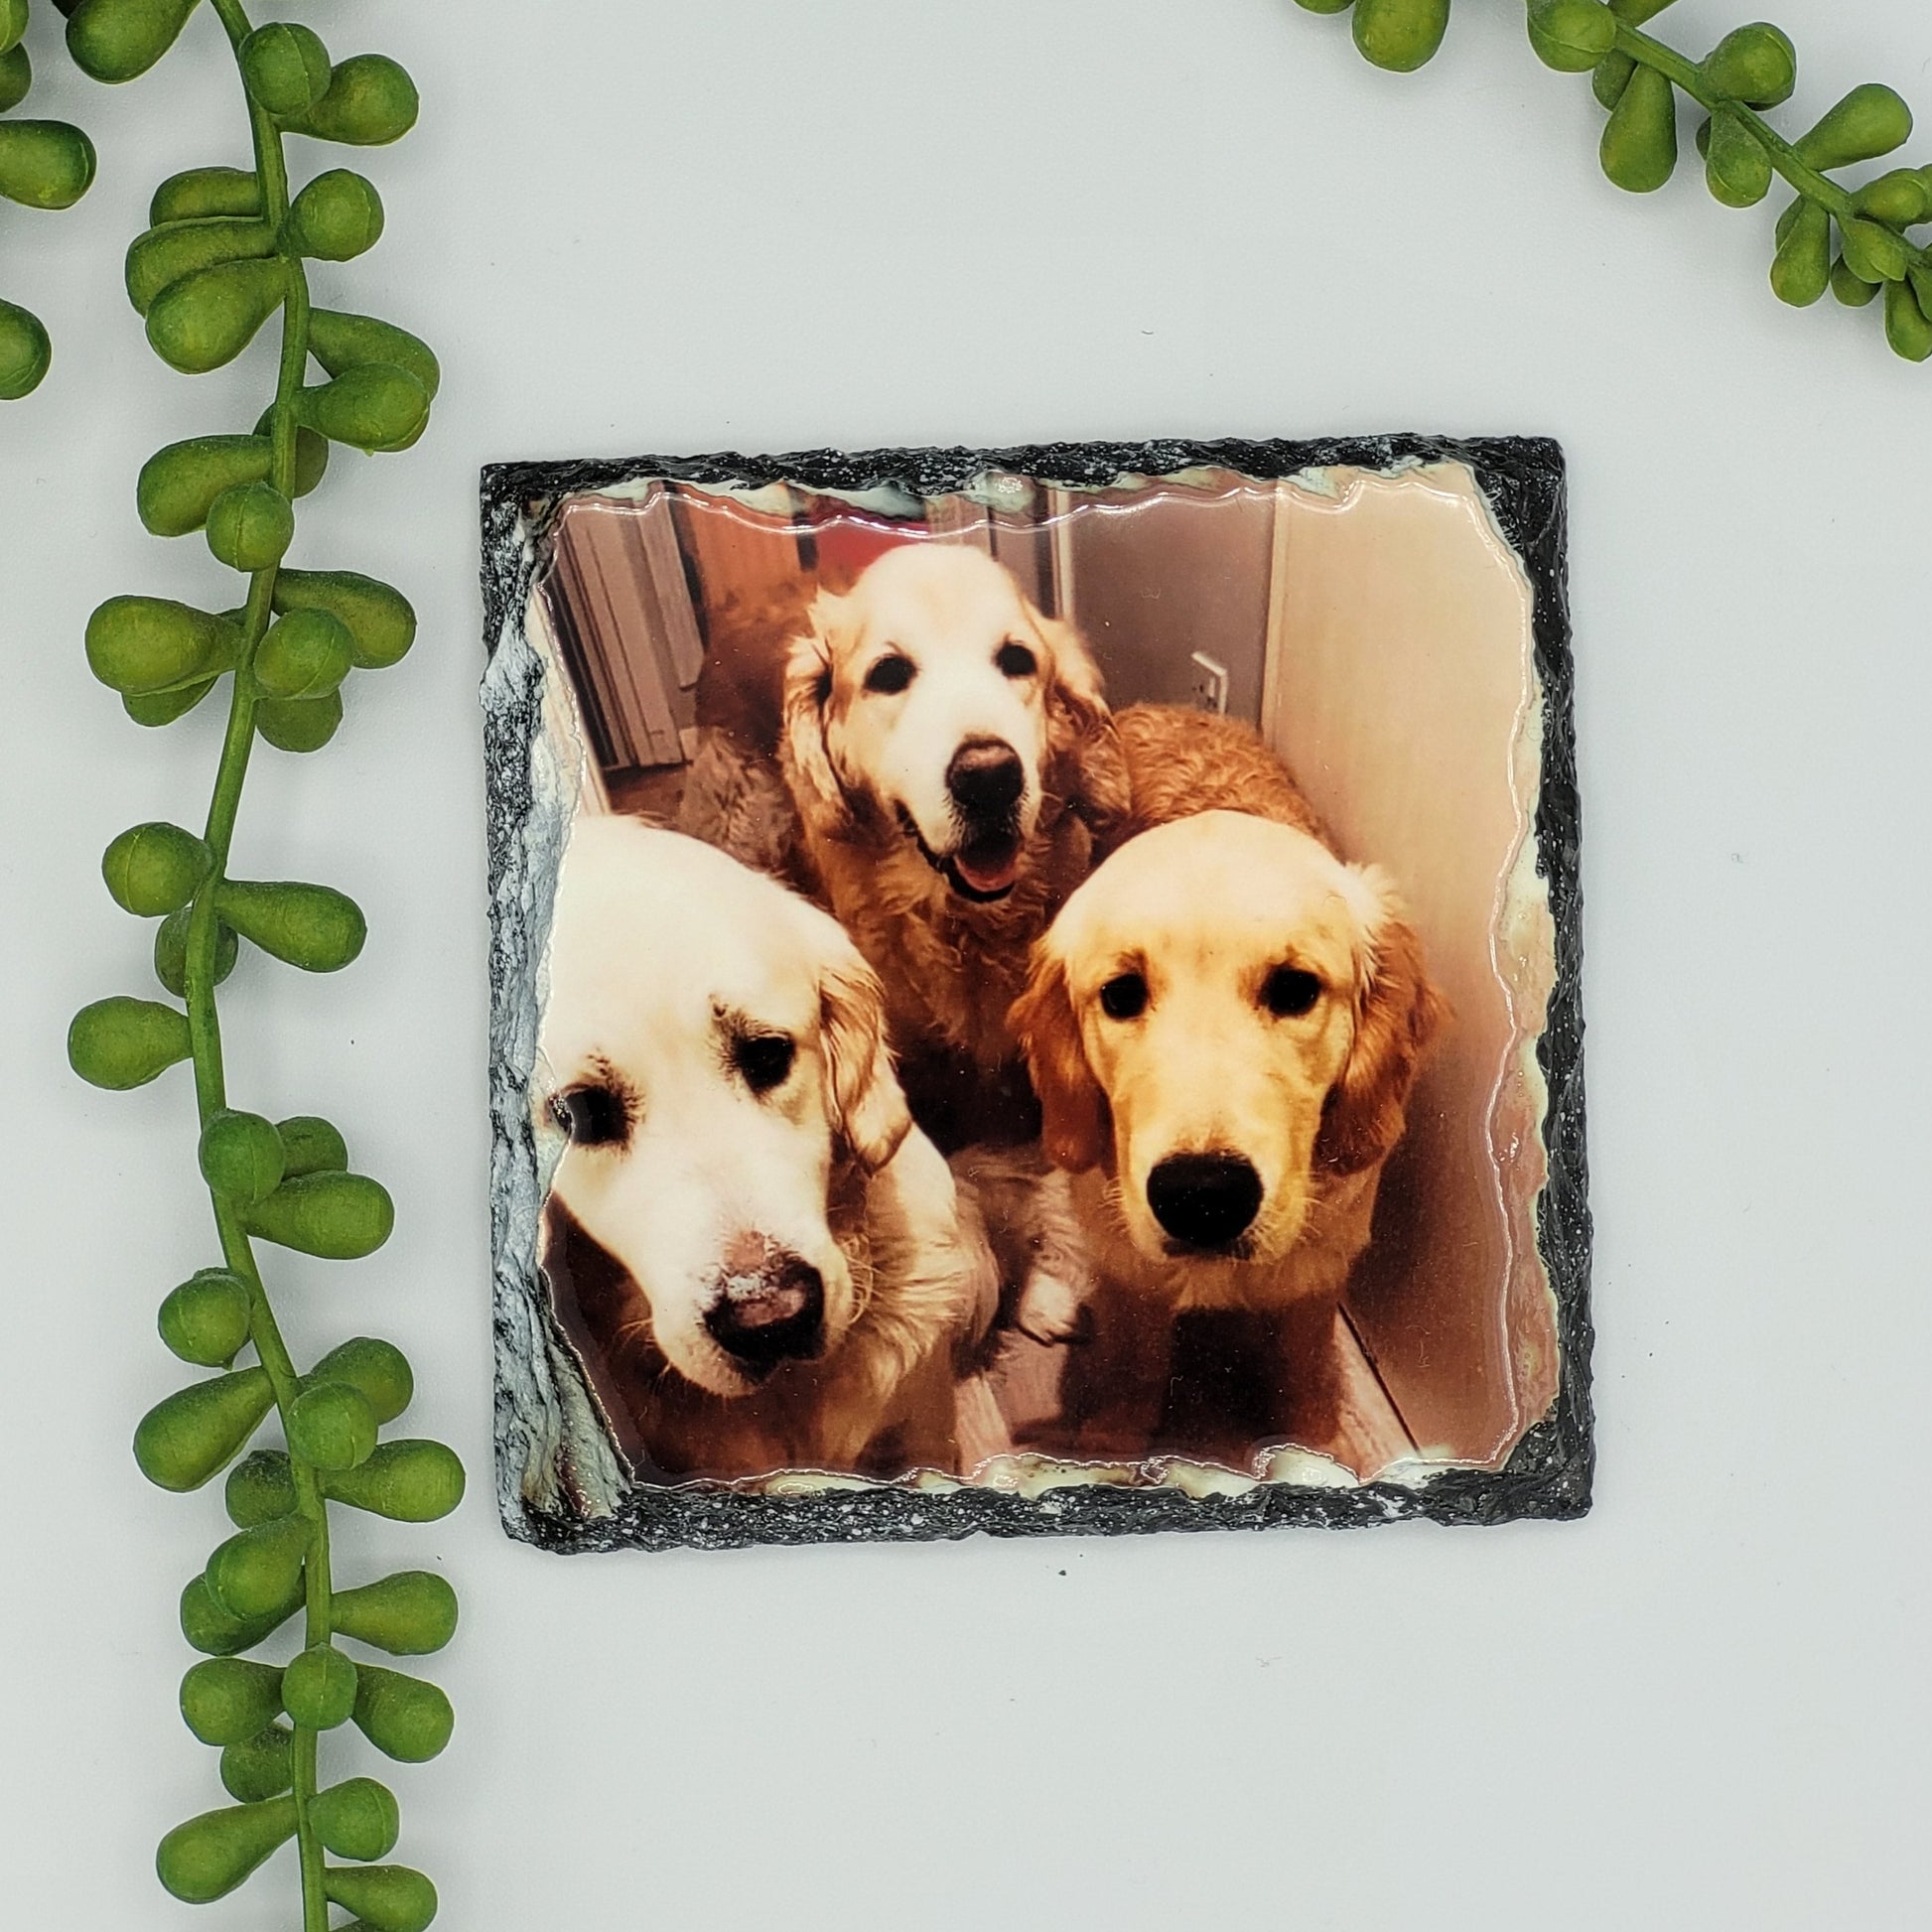 Slate photo coaster personalised gift to give M&G moose and goose gifts. Handmade gifts and keepsakes